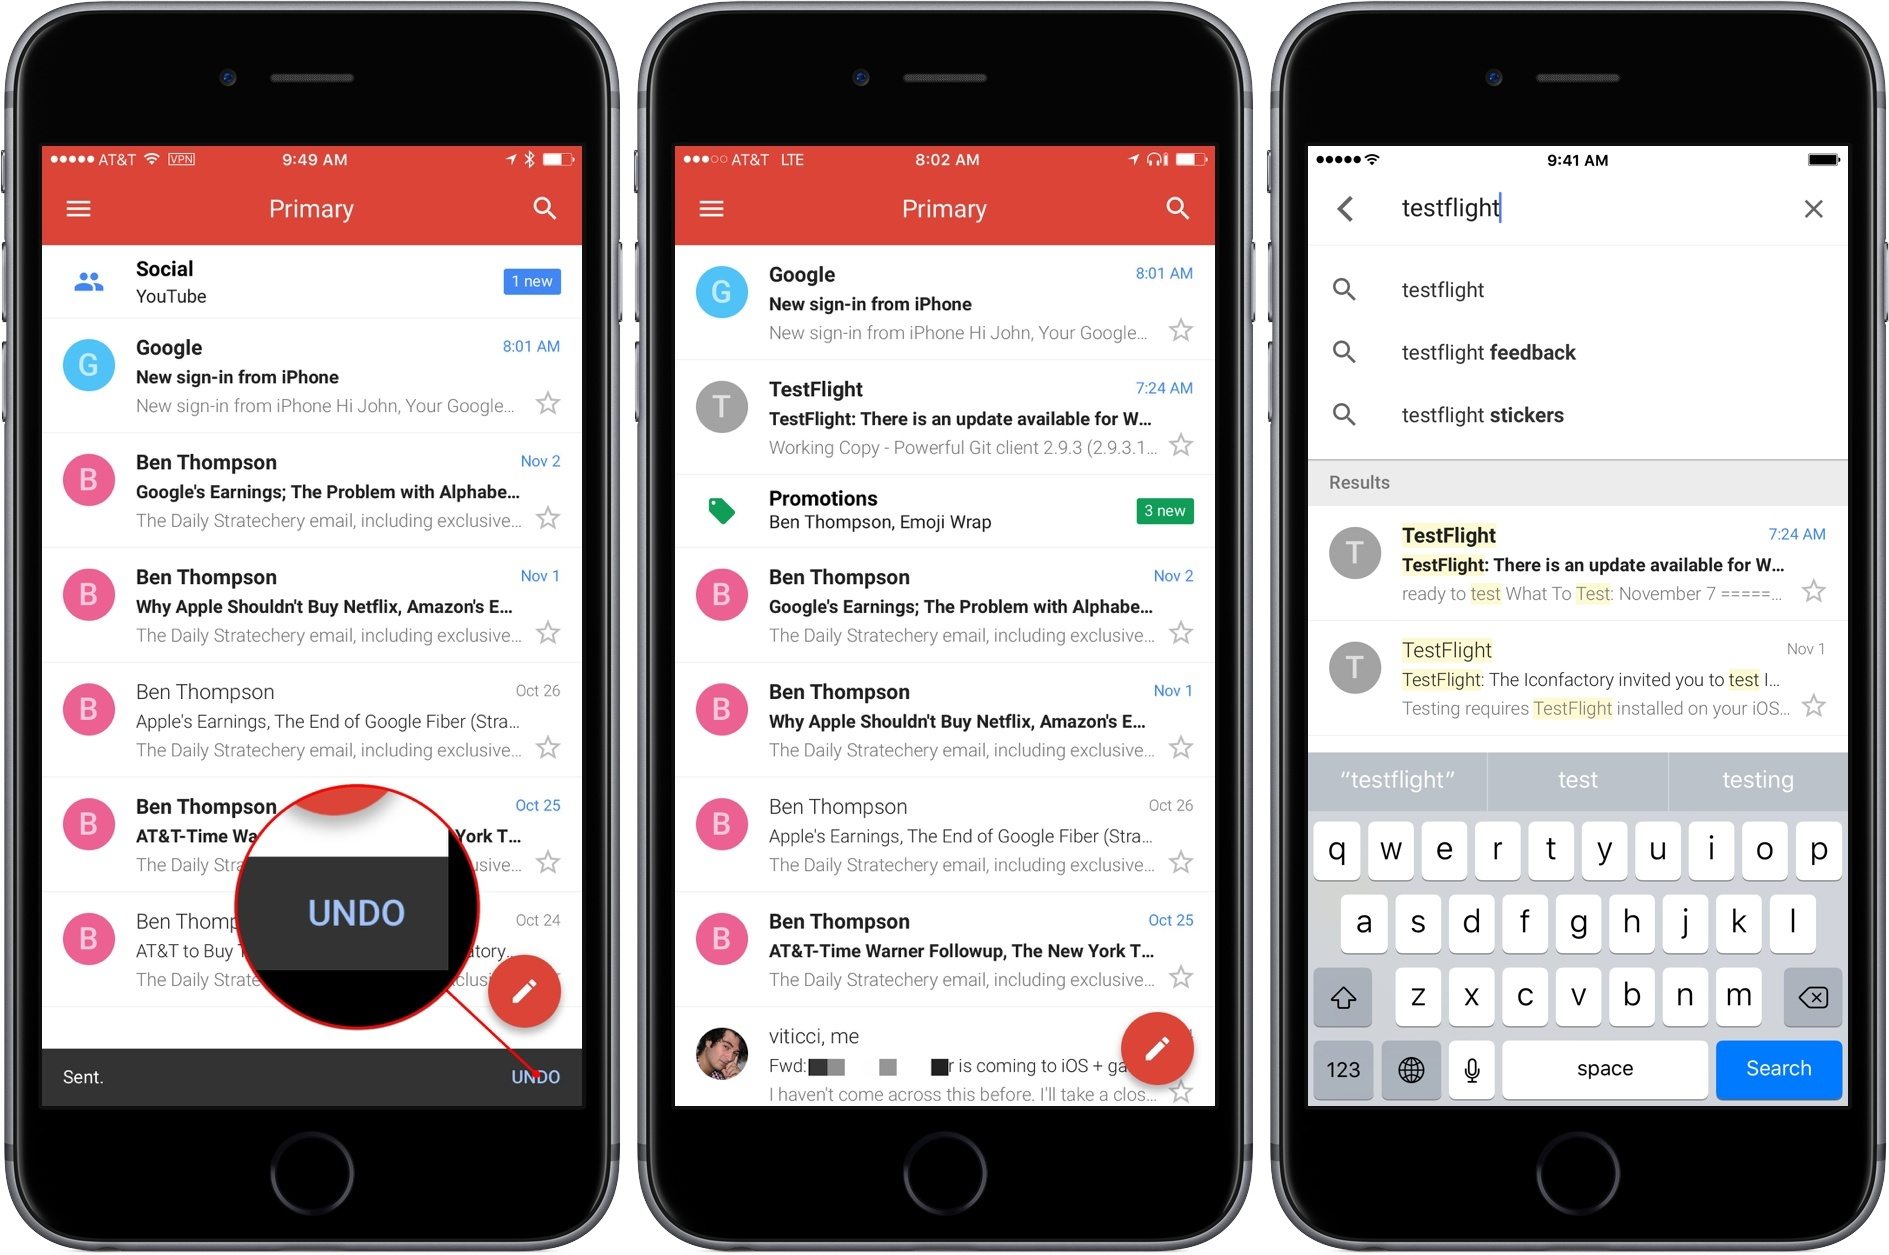 how-to-make-a-gmail-account-without-a-phone-number-2016